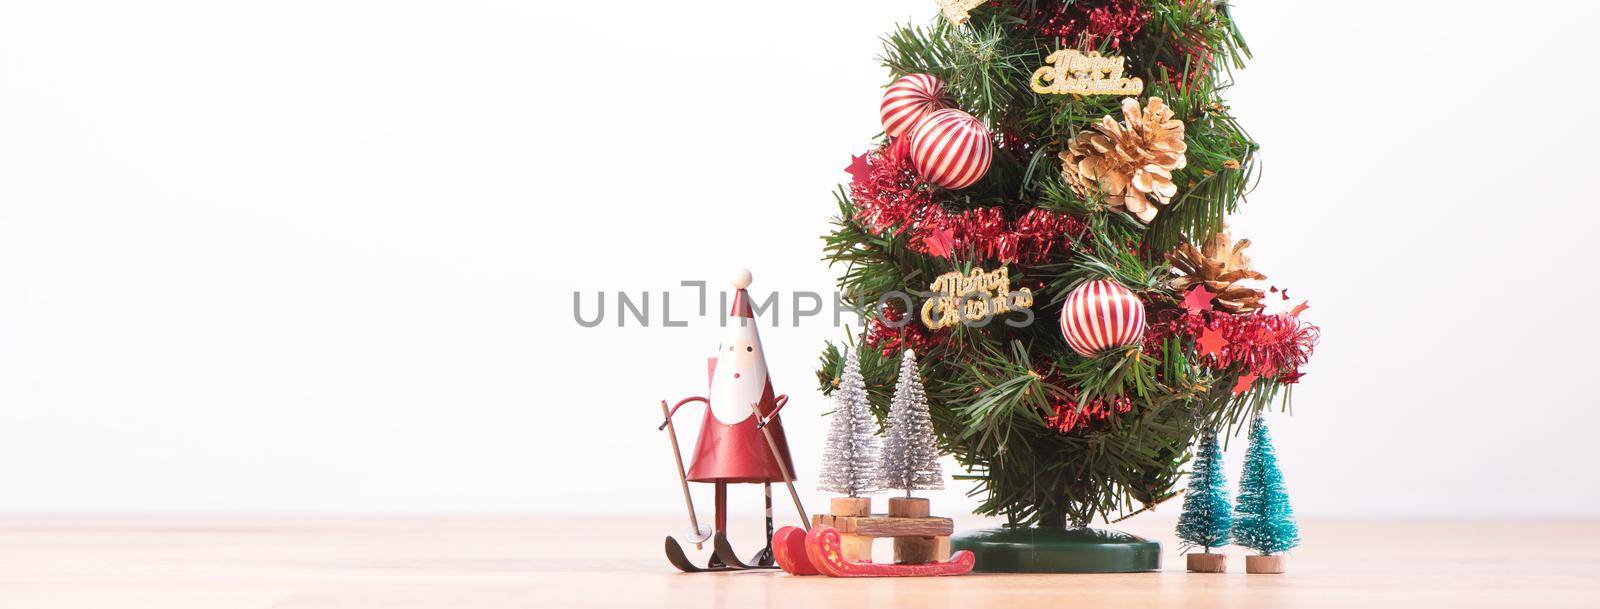 Decorated cute Christmas tree on a wooden floor with white background and toys, blank for festive design concept, close up.